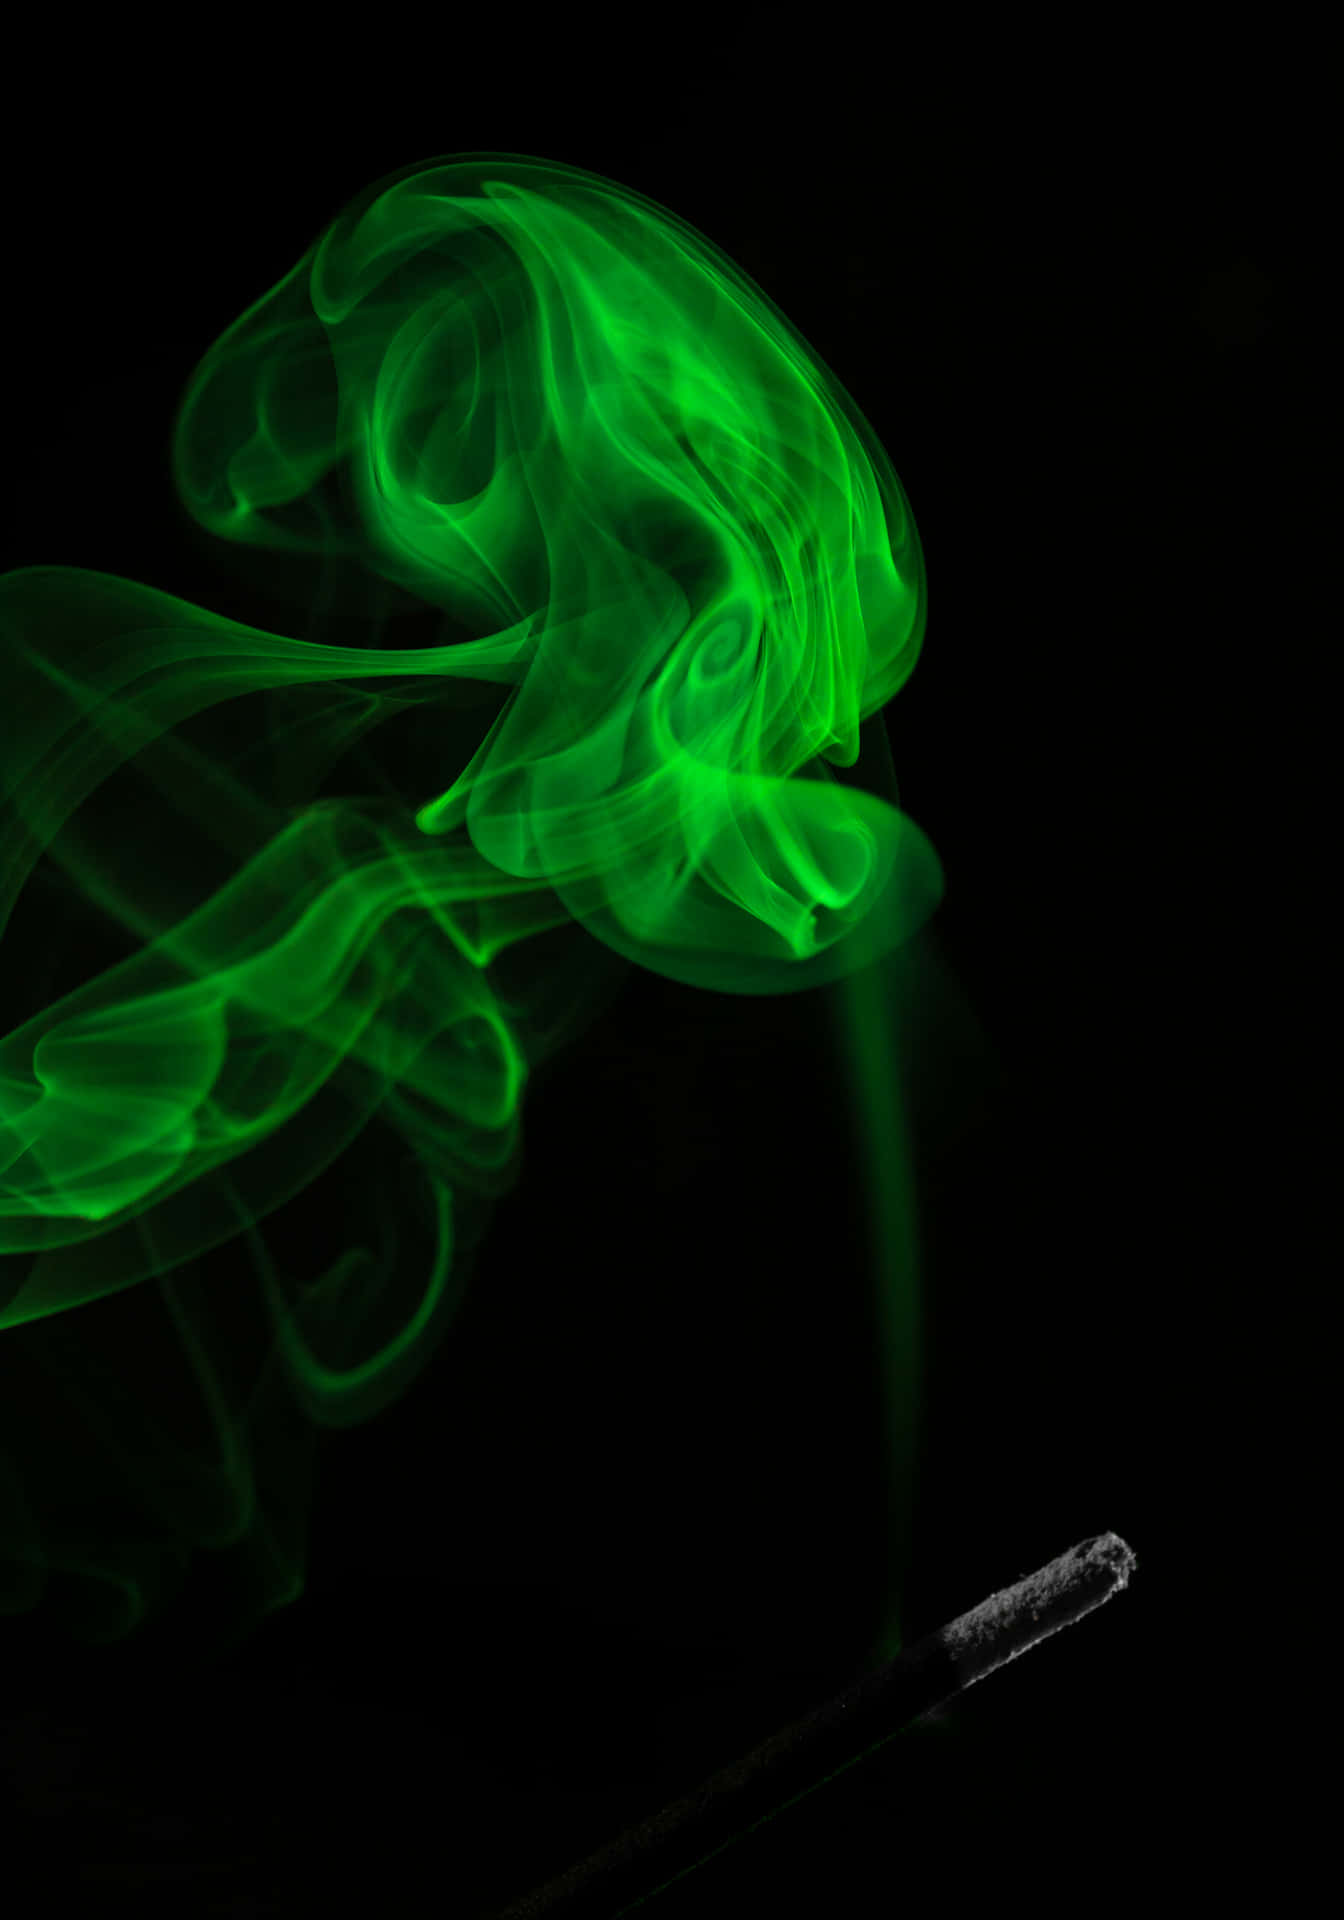 "Experience the rich flavour of Green Smoke with its unique combination of nicotine and flavourful vapour smoke."